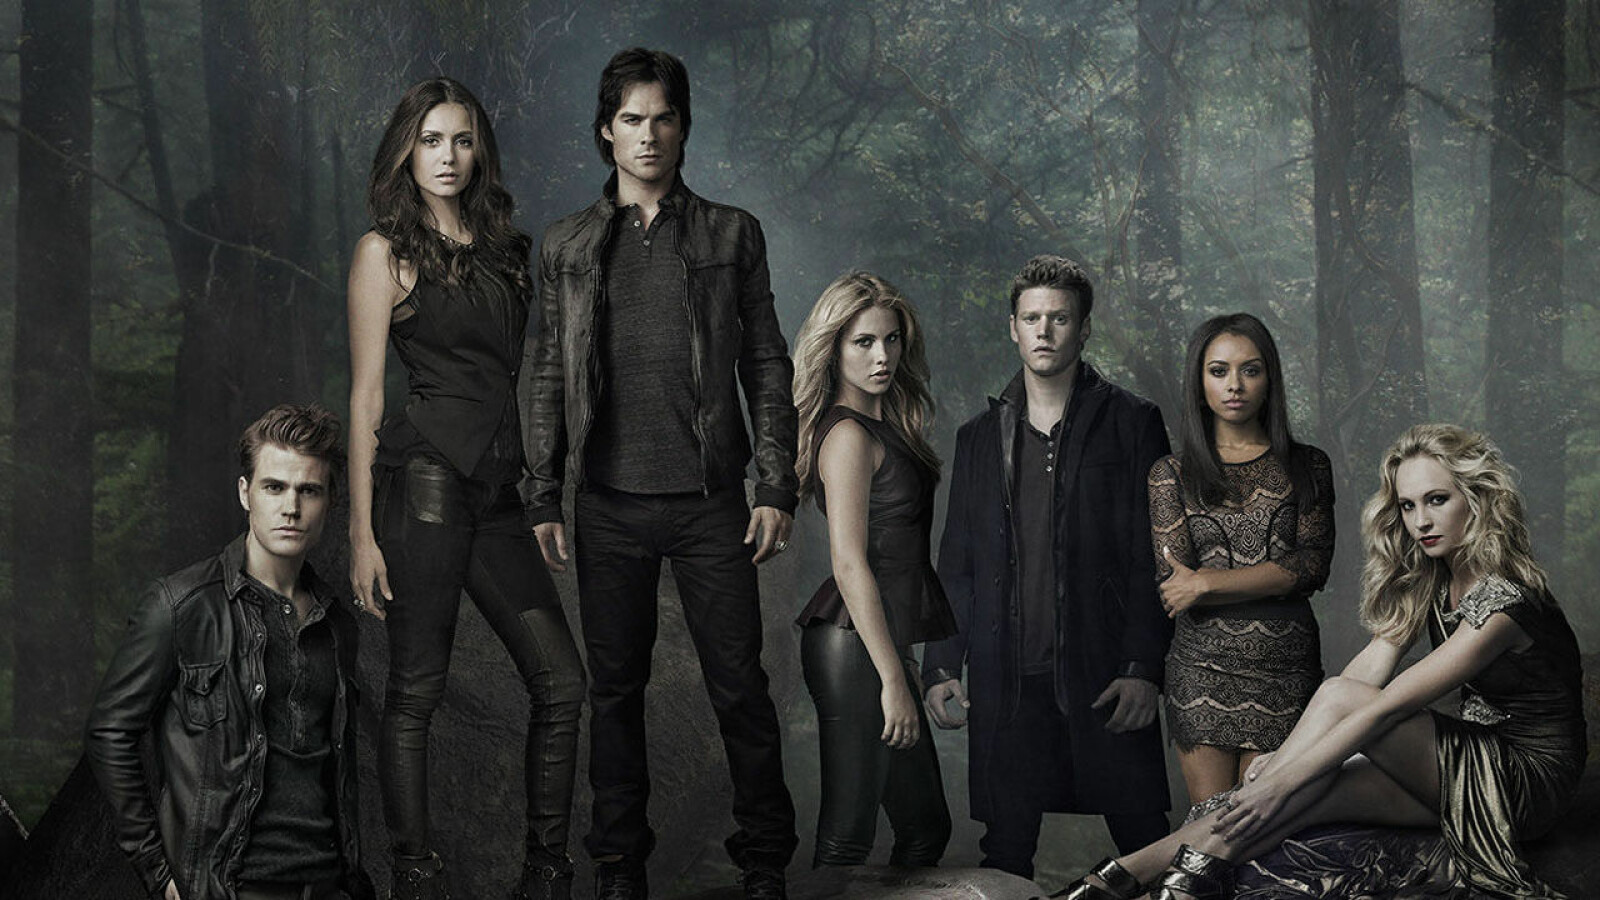 Seriados, Filmes & Afins: The Vampire Diaries / 3x 18 / The Murder Of One